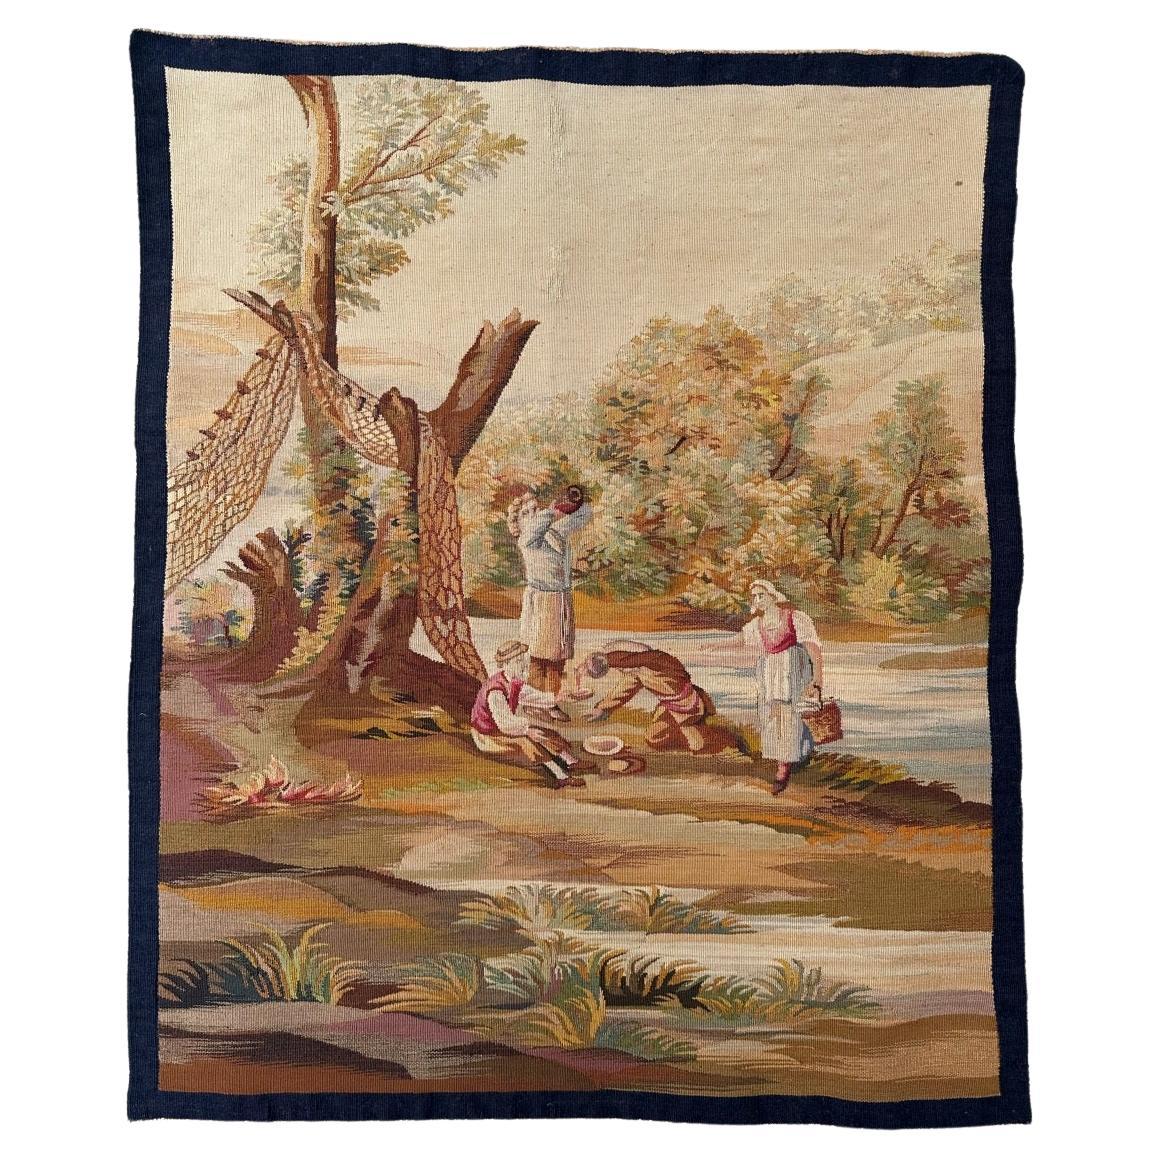 Bobyrug’s Wonderful Fine Antique French Aubusson Tapestry For Sale